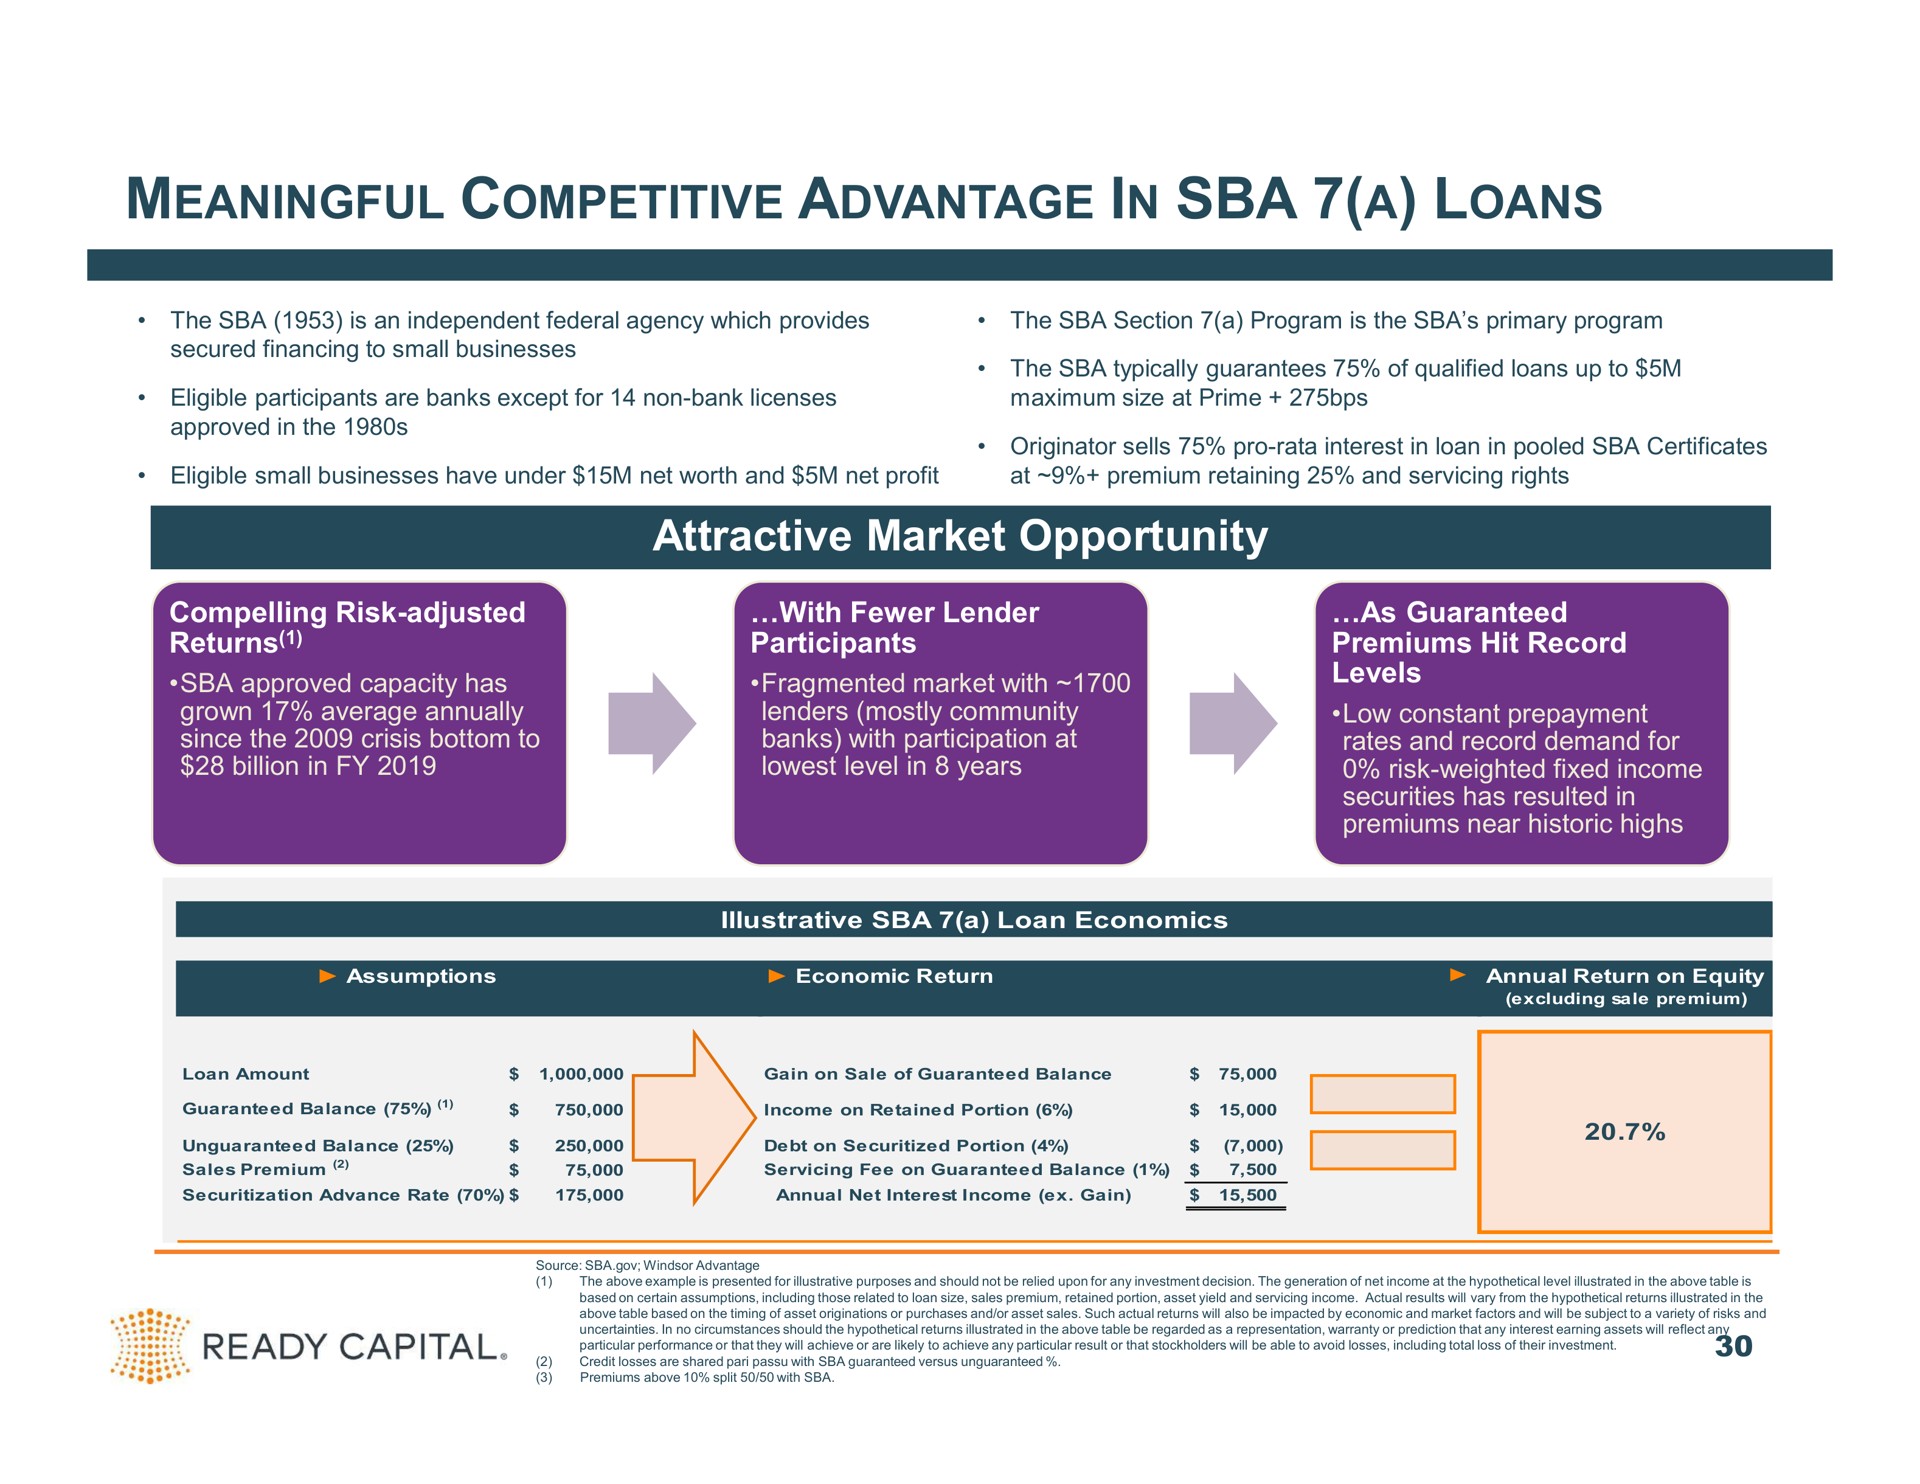 meaningful competitive advantage in a loans attractive market opportunity compelling risk adjusted returns with lender participants as guaranteed premiums hit record levels | Ready Capital